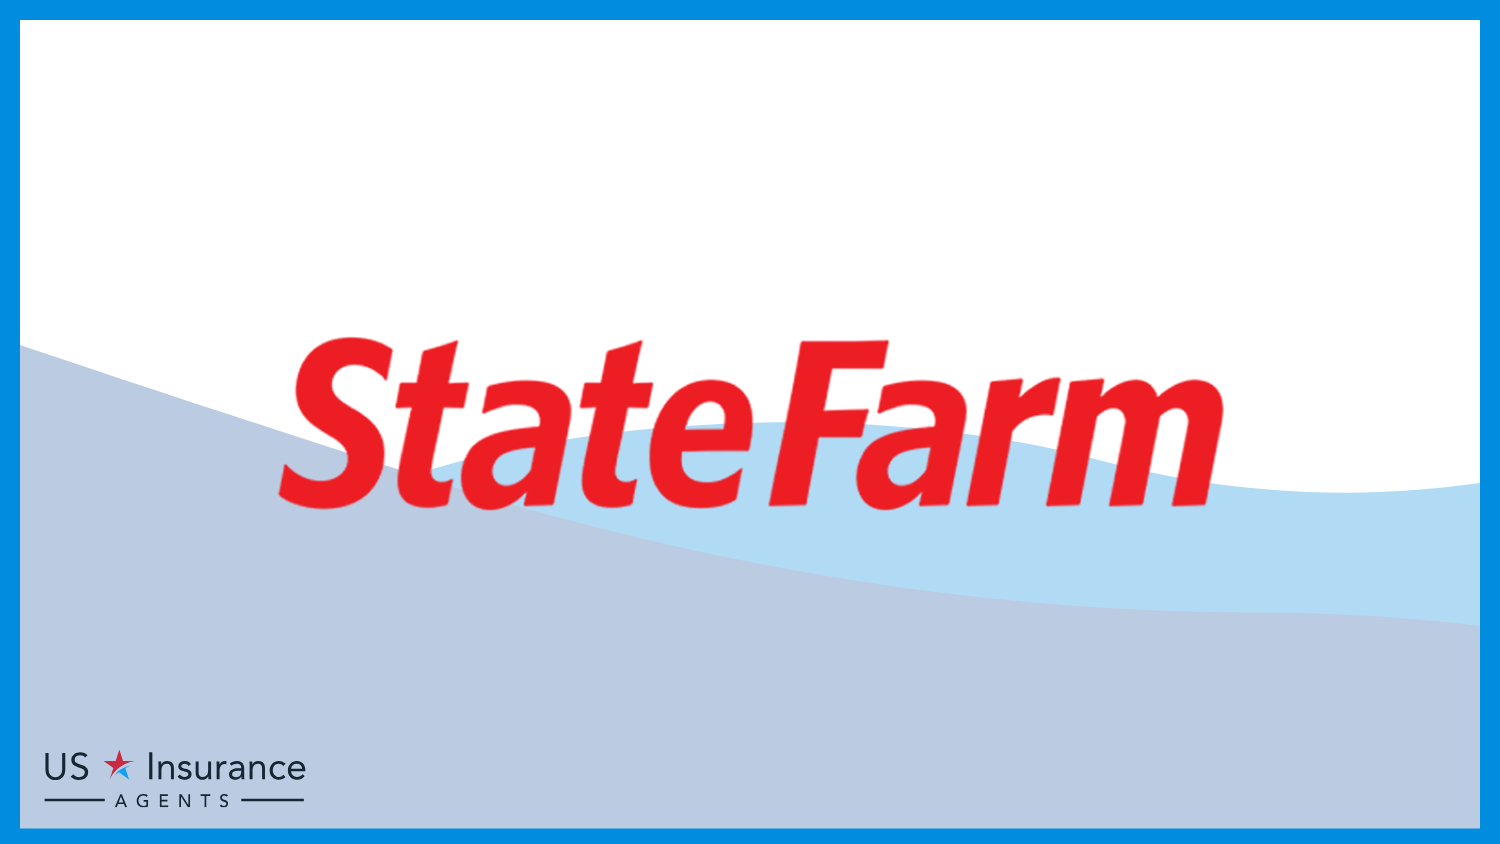 State Farm: Best Business Insurance for Pressure Washing Businesses